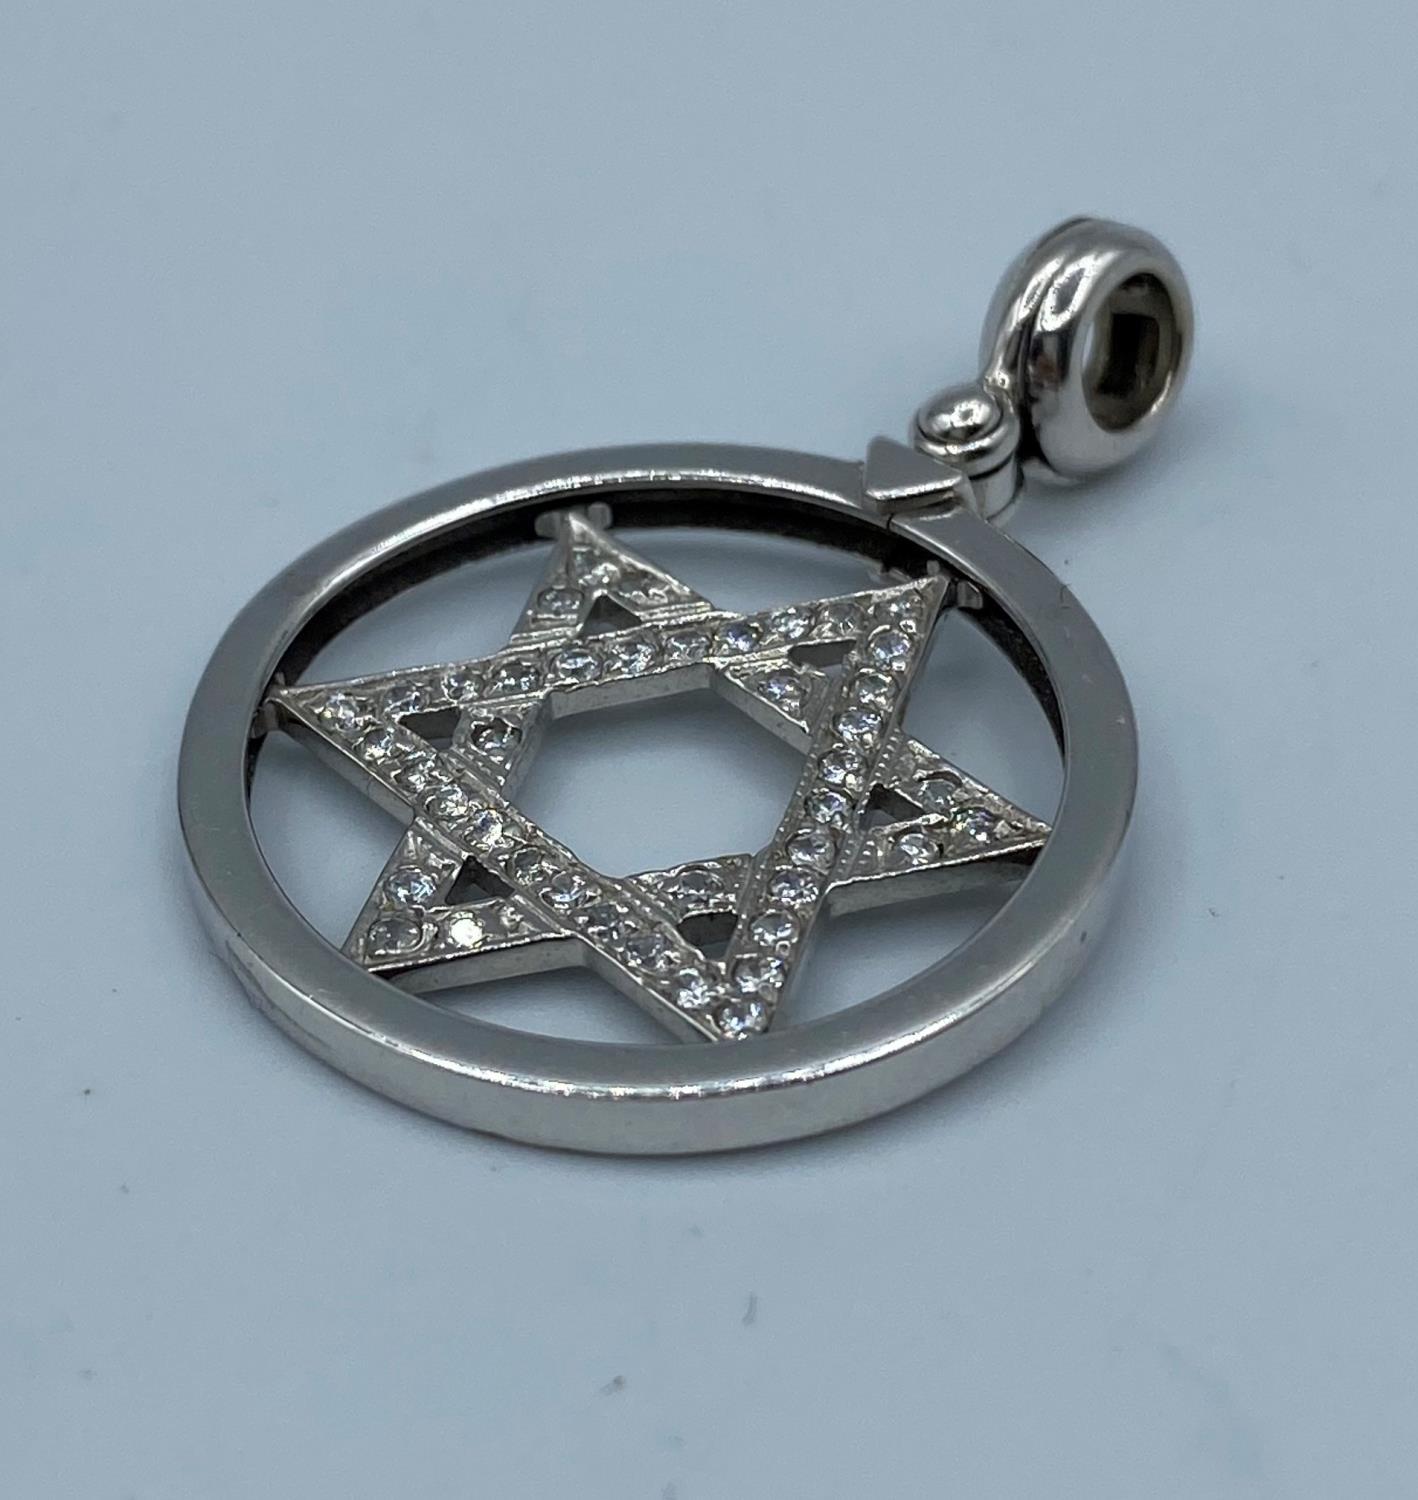 14k white gold large Star of David pendant with encrusted CZ stones, weight 6.26g and 28mm